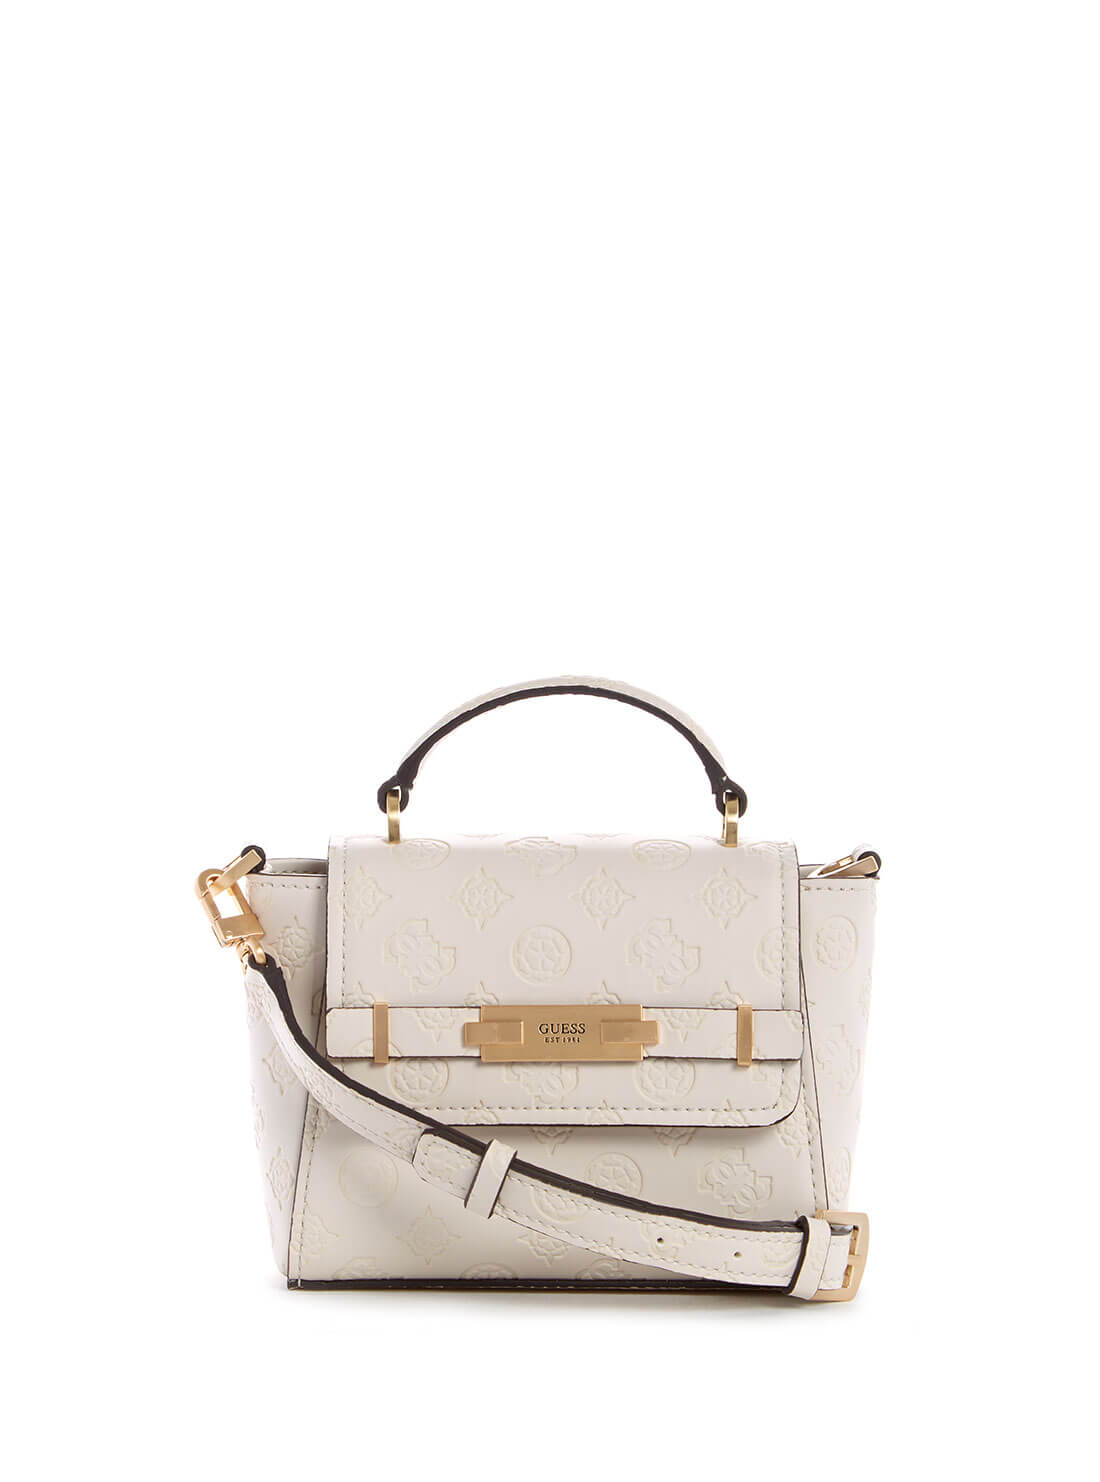 GUESS White Bea Mini Top Handle Bag front view